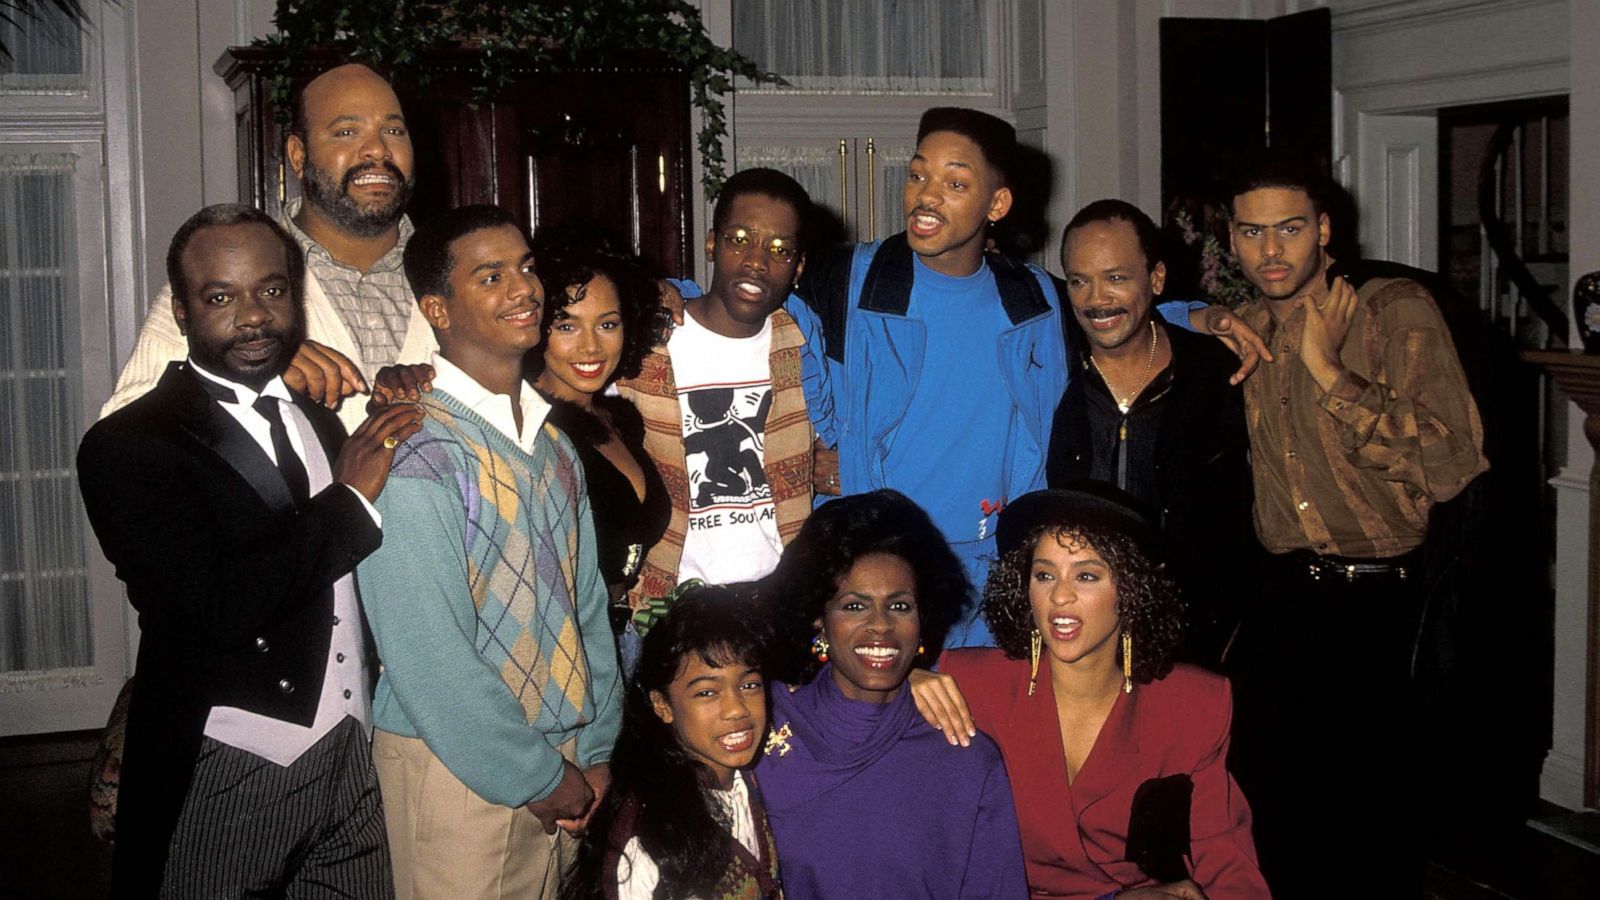 PHOTO: A photo of the cast of "The Fresh Prince of Bel-Air," Oct. 20, 1990, in Hollywood, Calif.